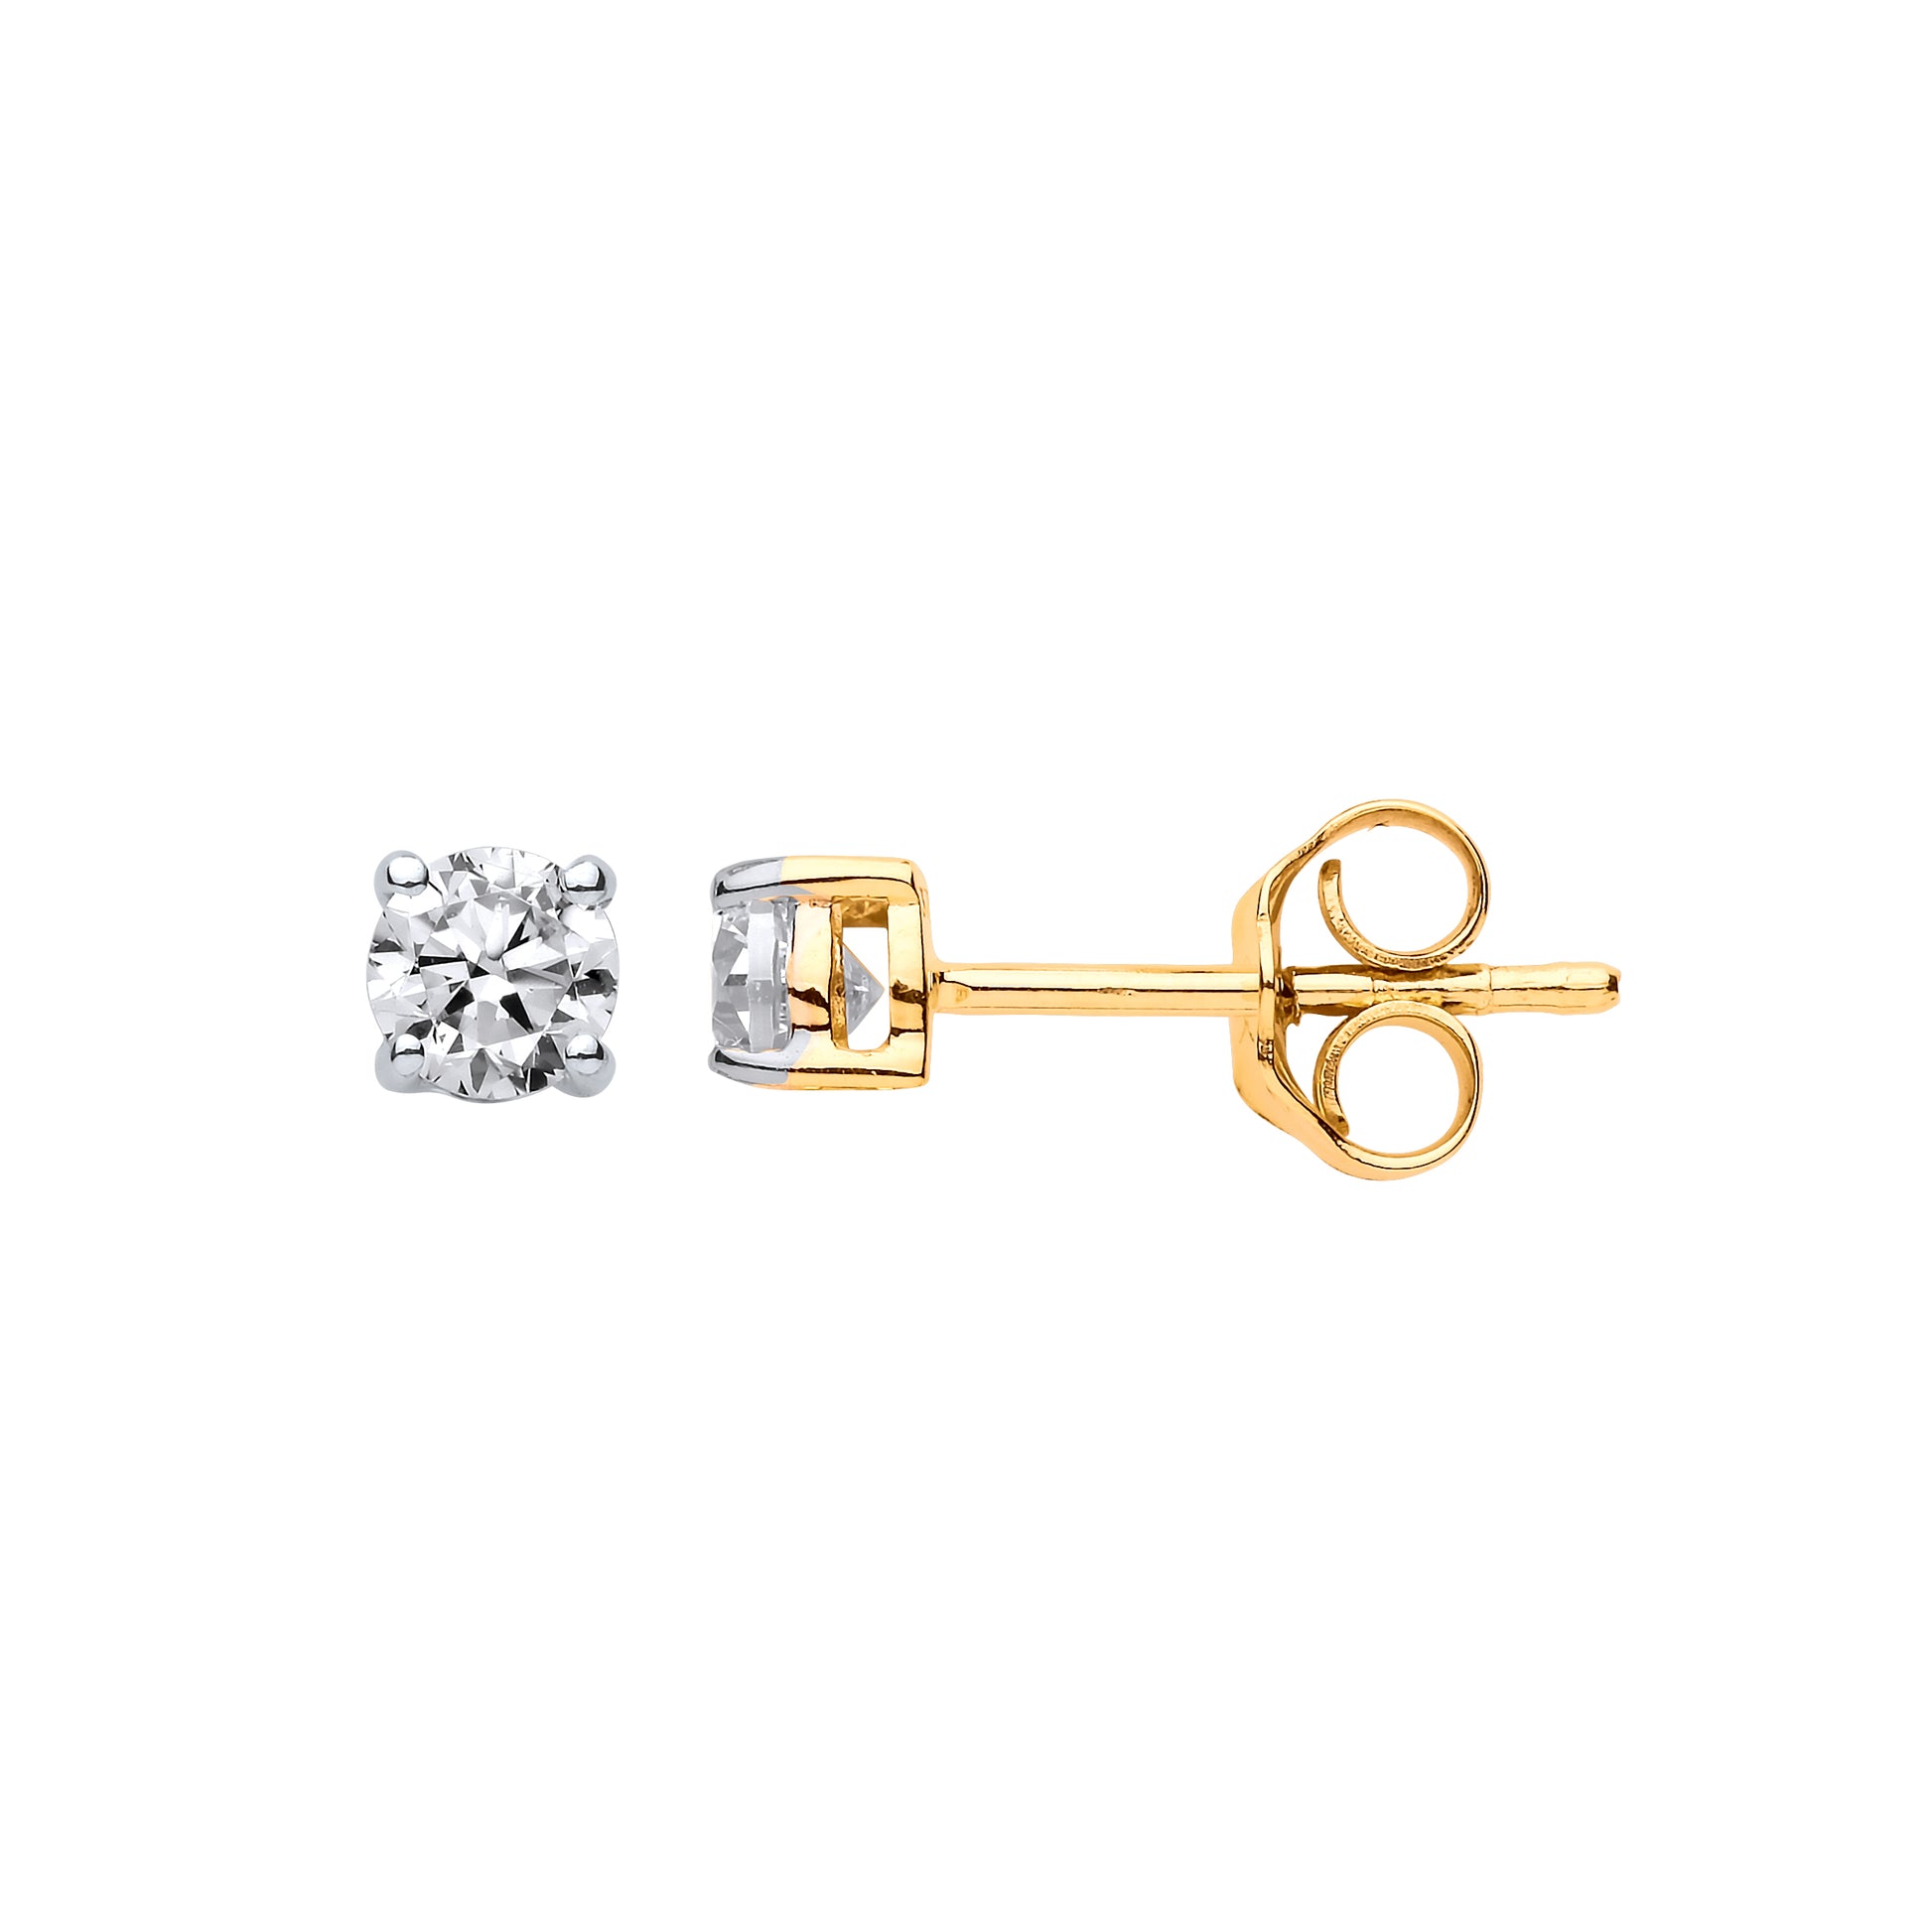 9ct Gold  4 Claw Solitaire Stud Earrings 4mm - G9E8066